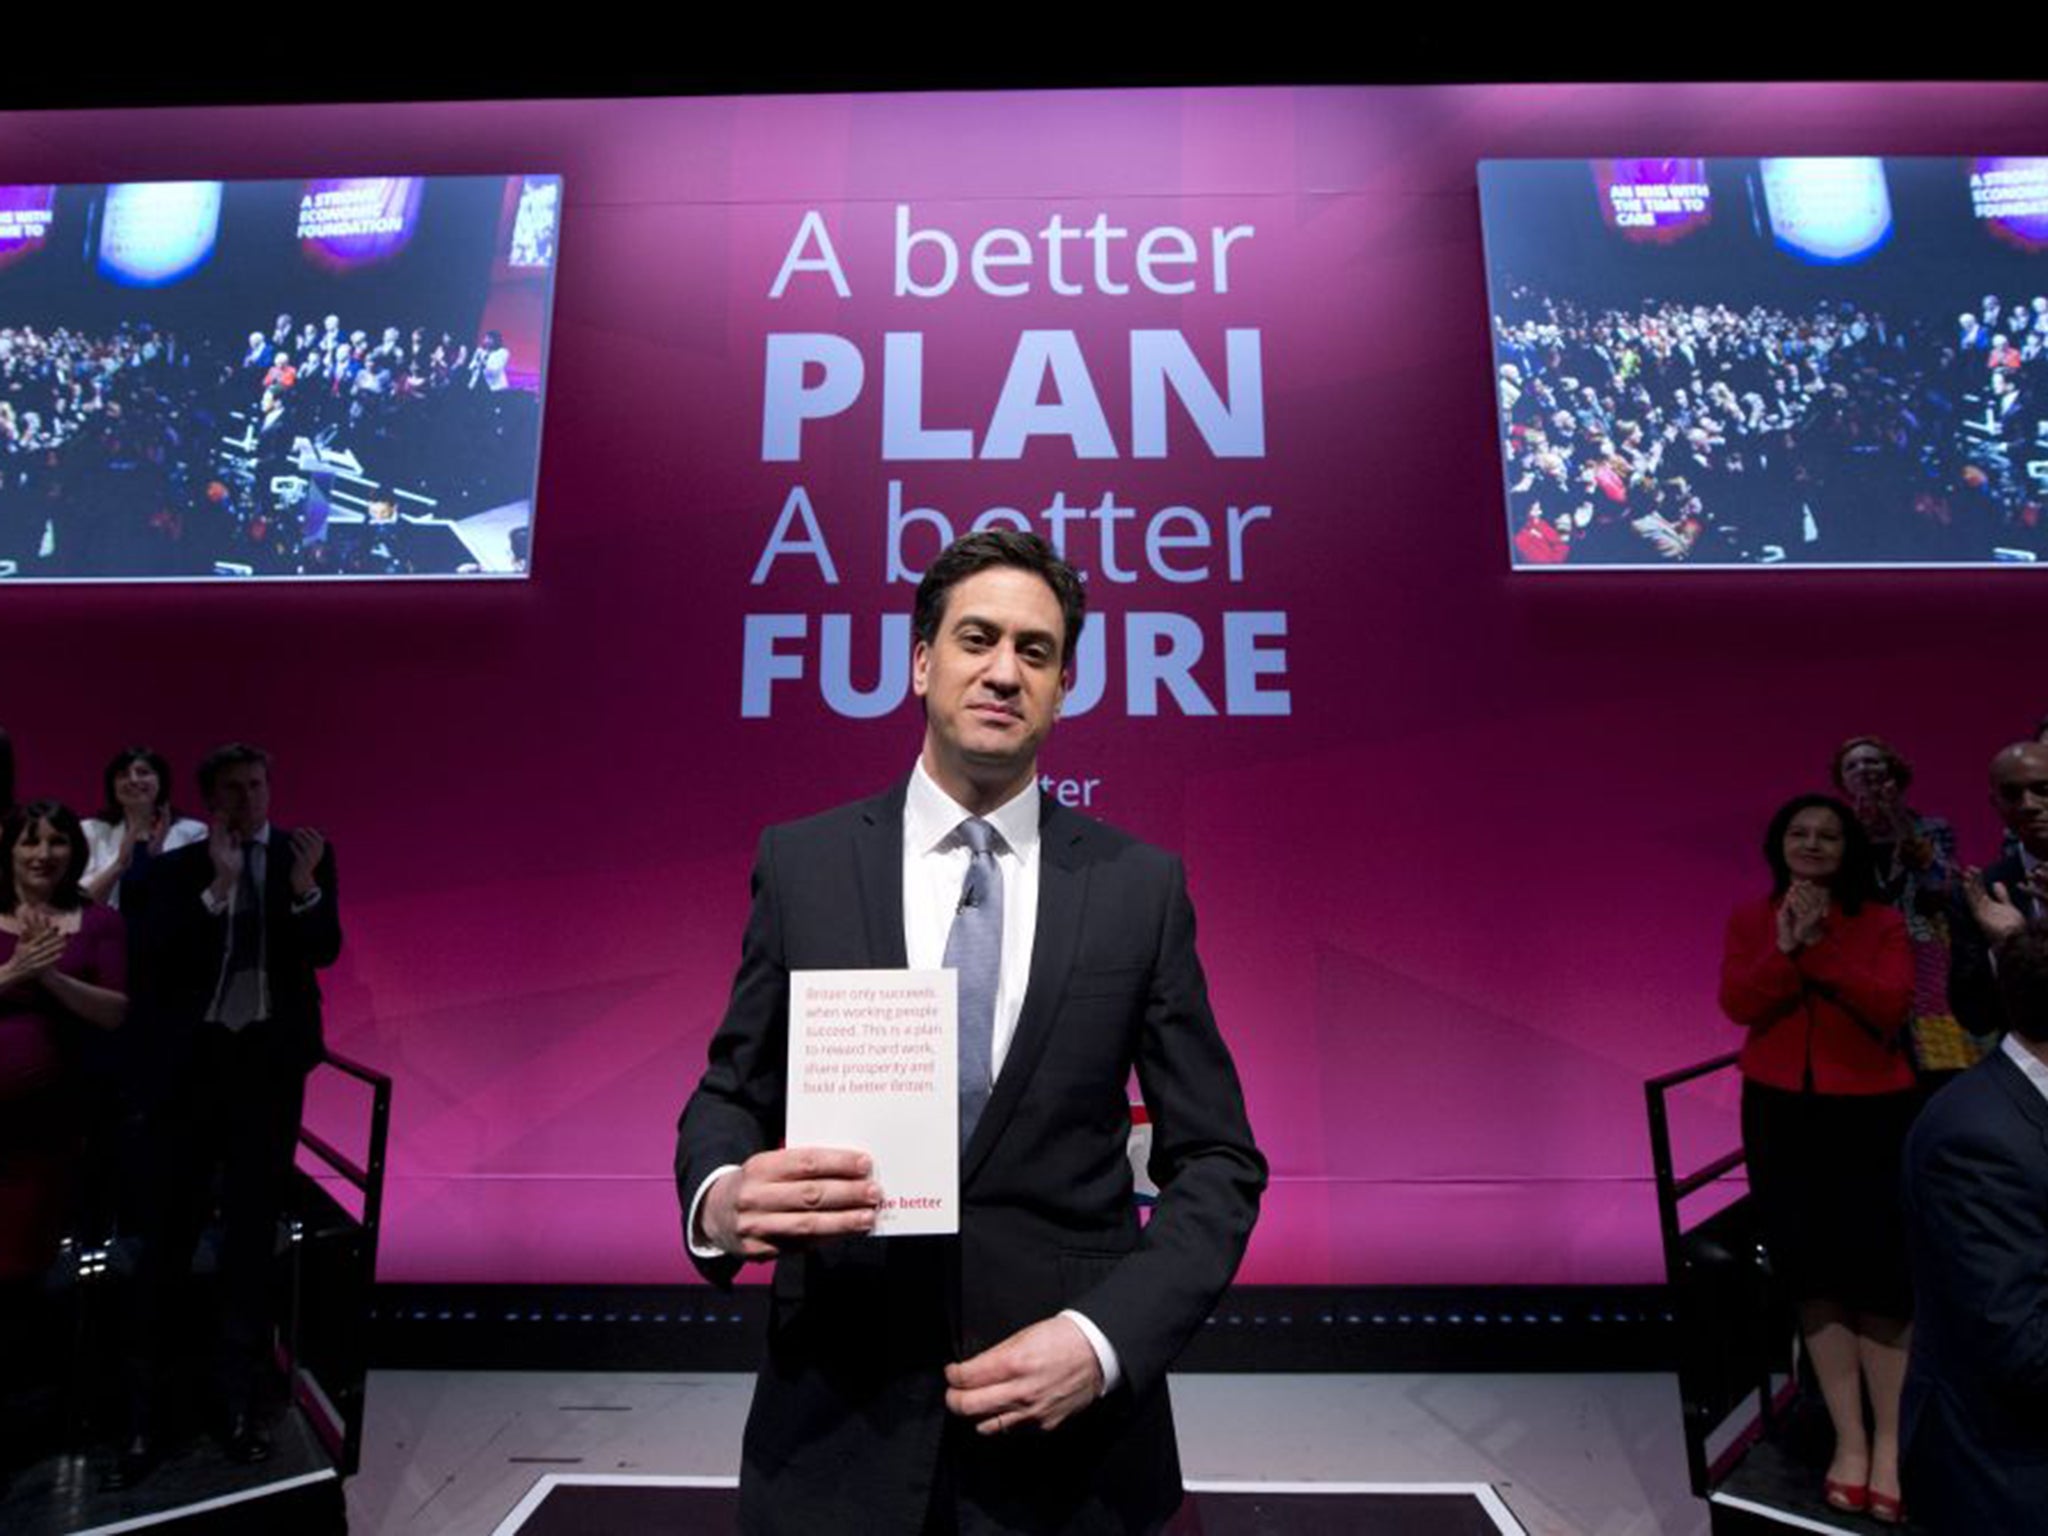 Labour: “Britain Can Be Better” (AFP/Getty)